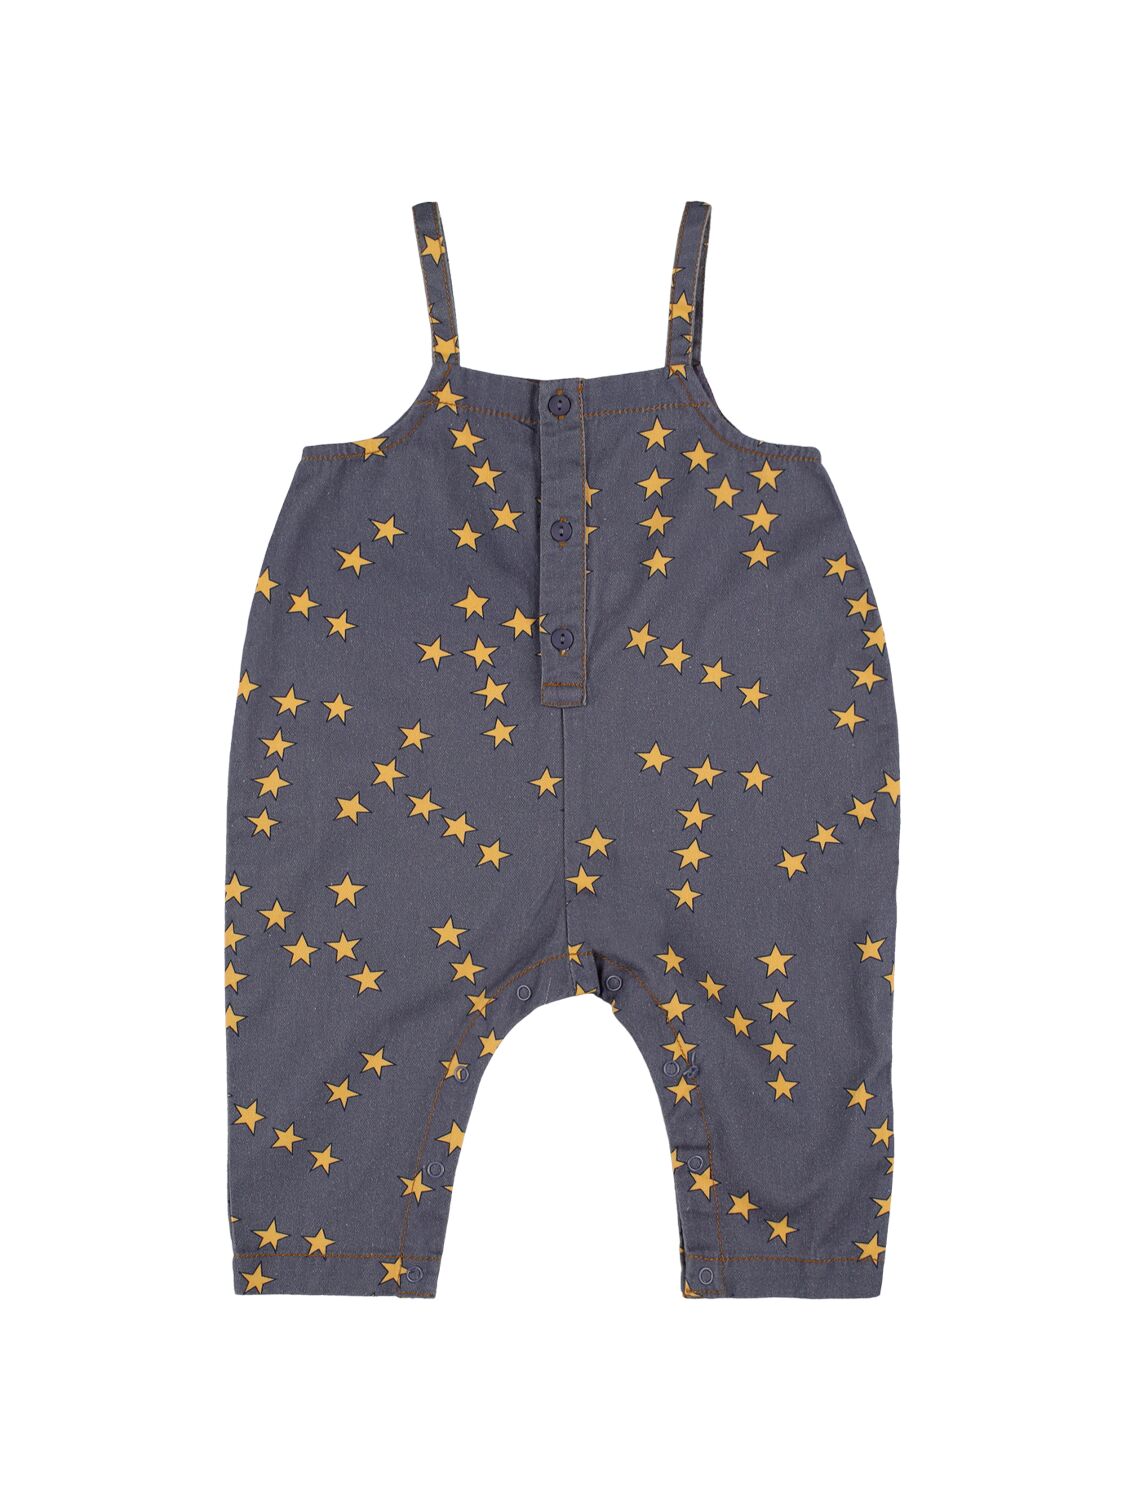 Tiny Cottons Babies' Star Print Cotton Denim Overalls In Navy